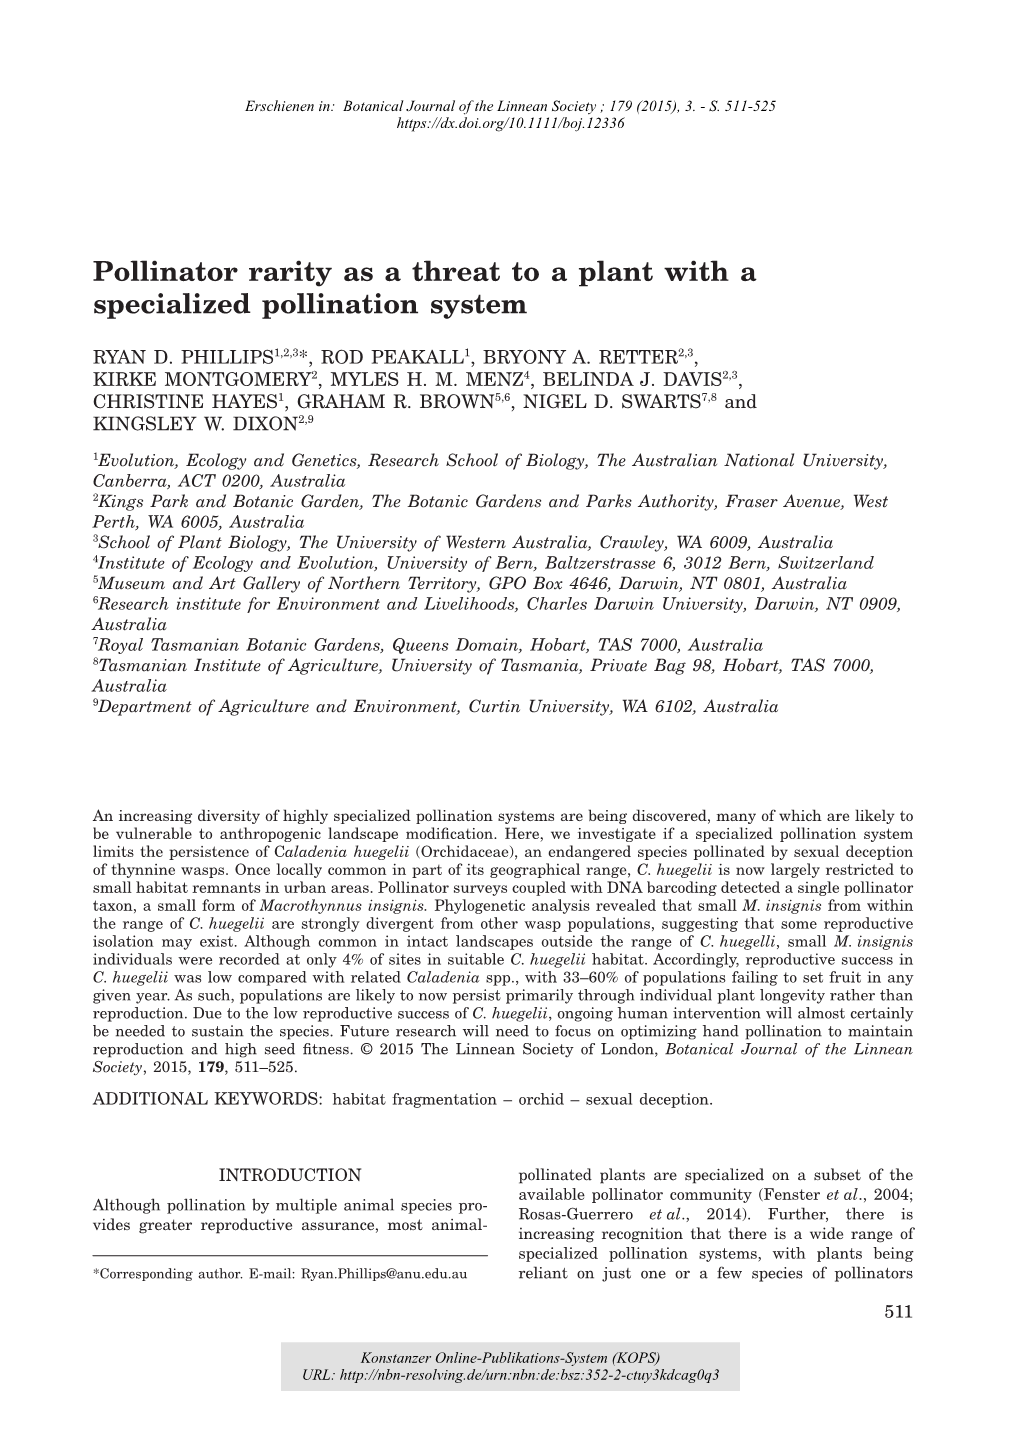 Pollinator Rarity As a Threat to a Plant with a Specialized Pollination System